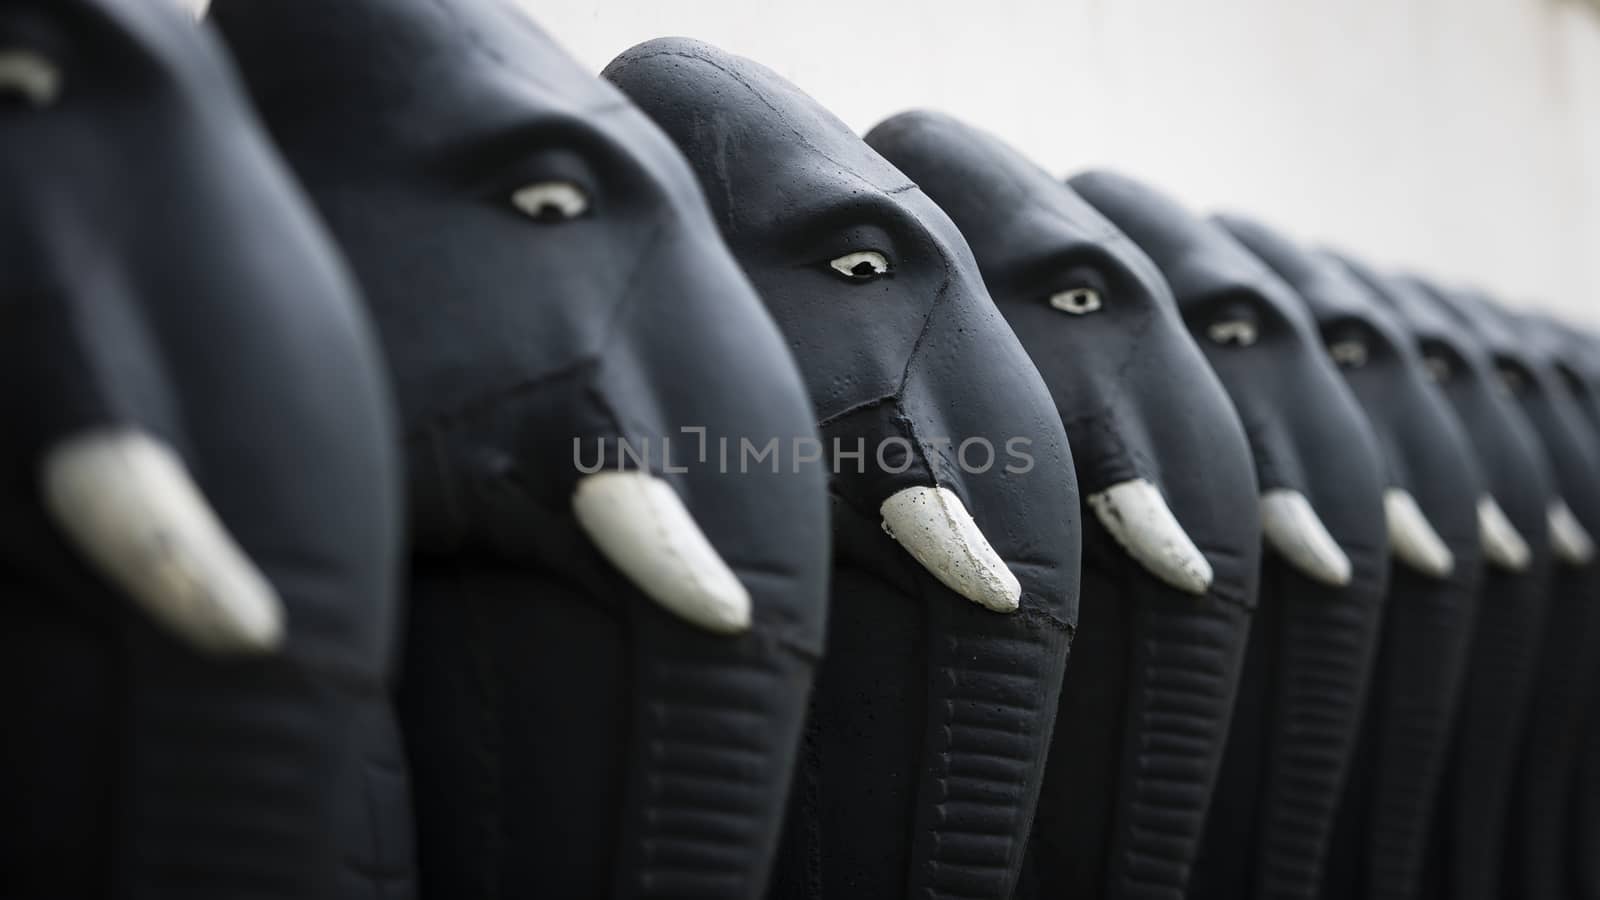 Row of frontline elephants sculptures at the temple.

Photographed using Nikon-D800E (36 megapixels) DSLR with AF-S NIKKOR 70-200 mm f/2.8G ED VR II lens at focal length 122 mm, ISO 100, and exposure 1/250 sec at f/2.8.